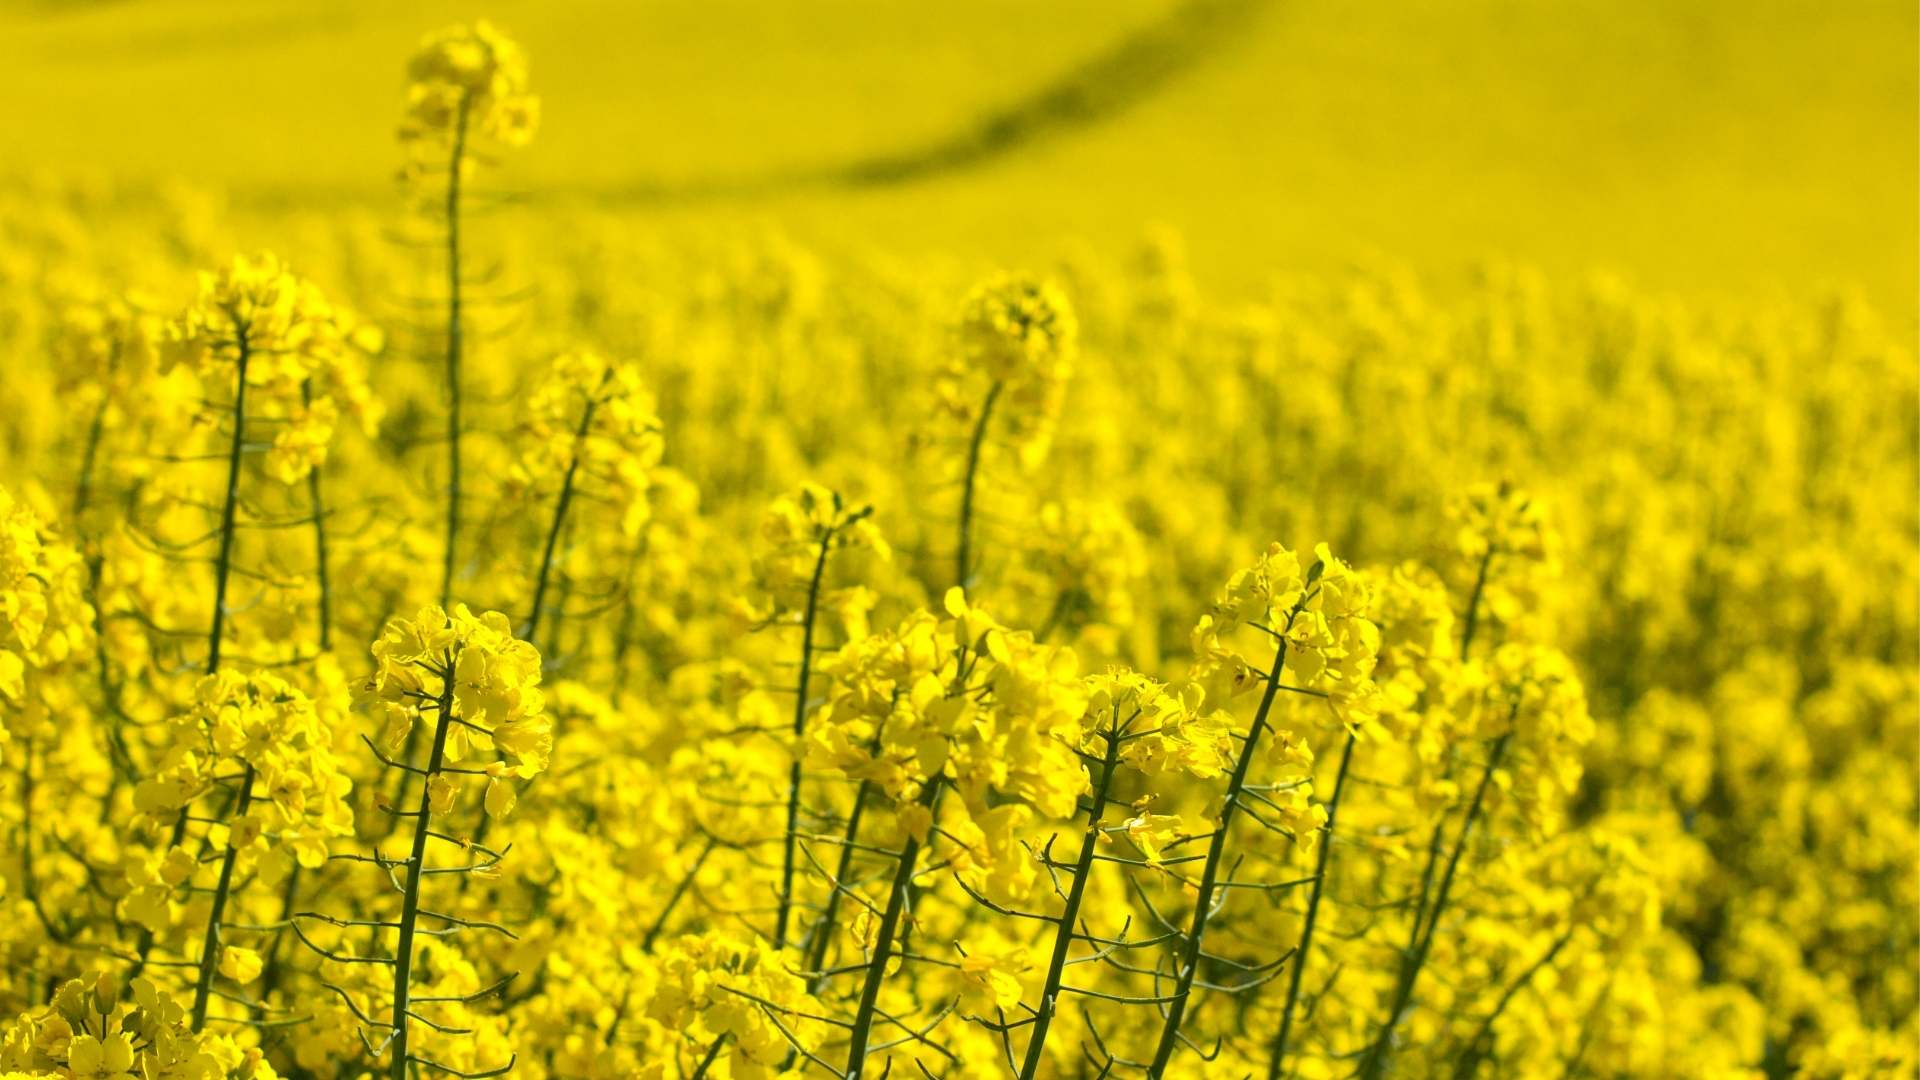 A photo of a field of canola flowers